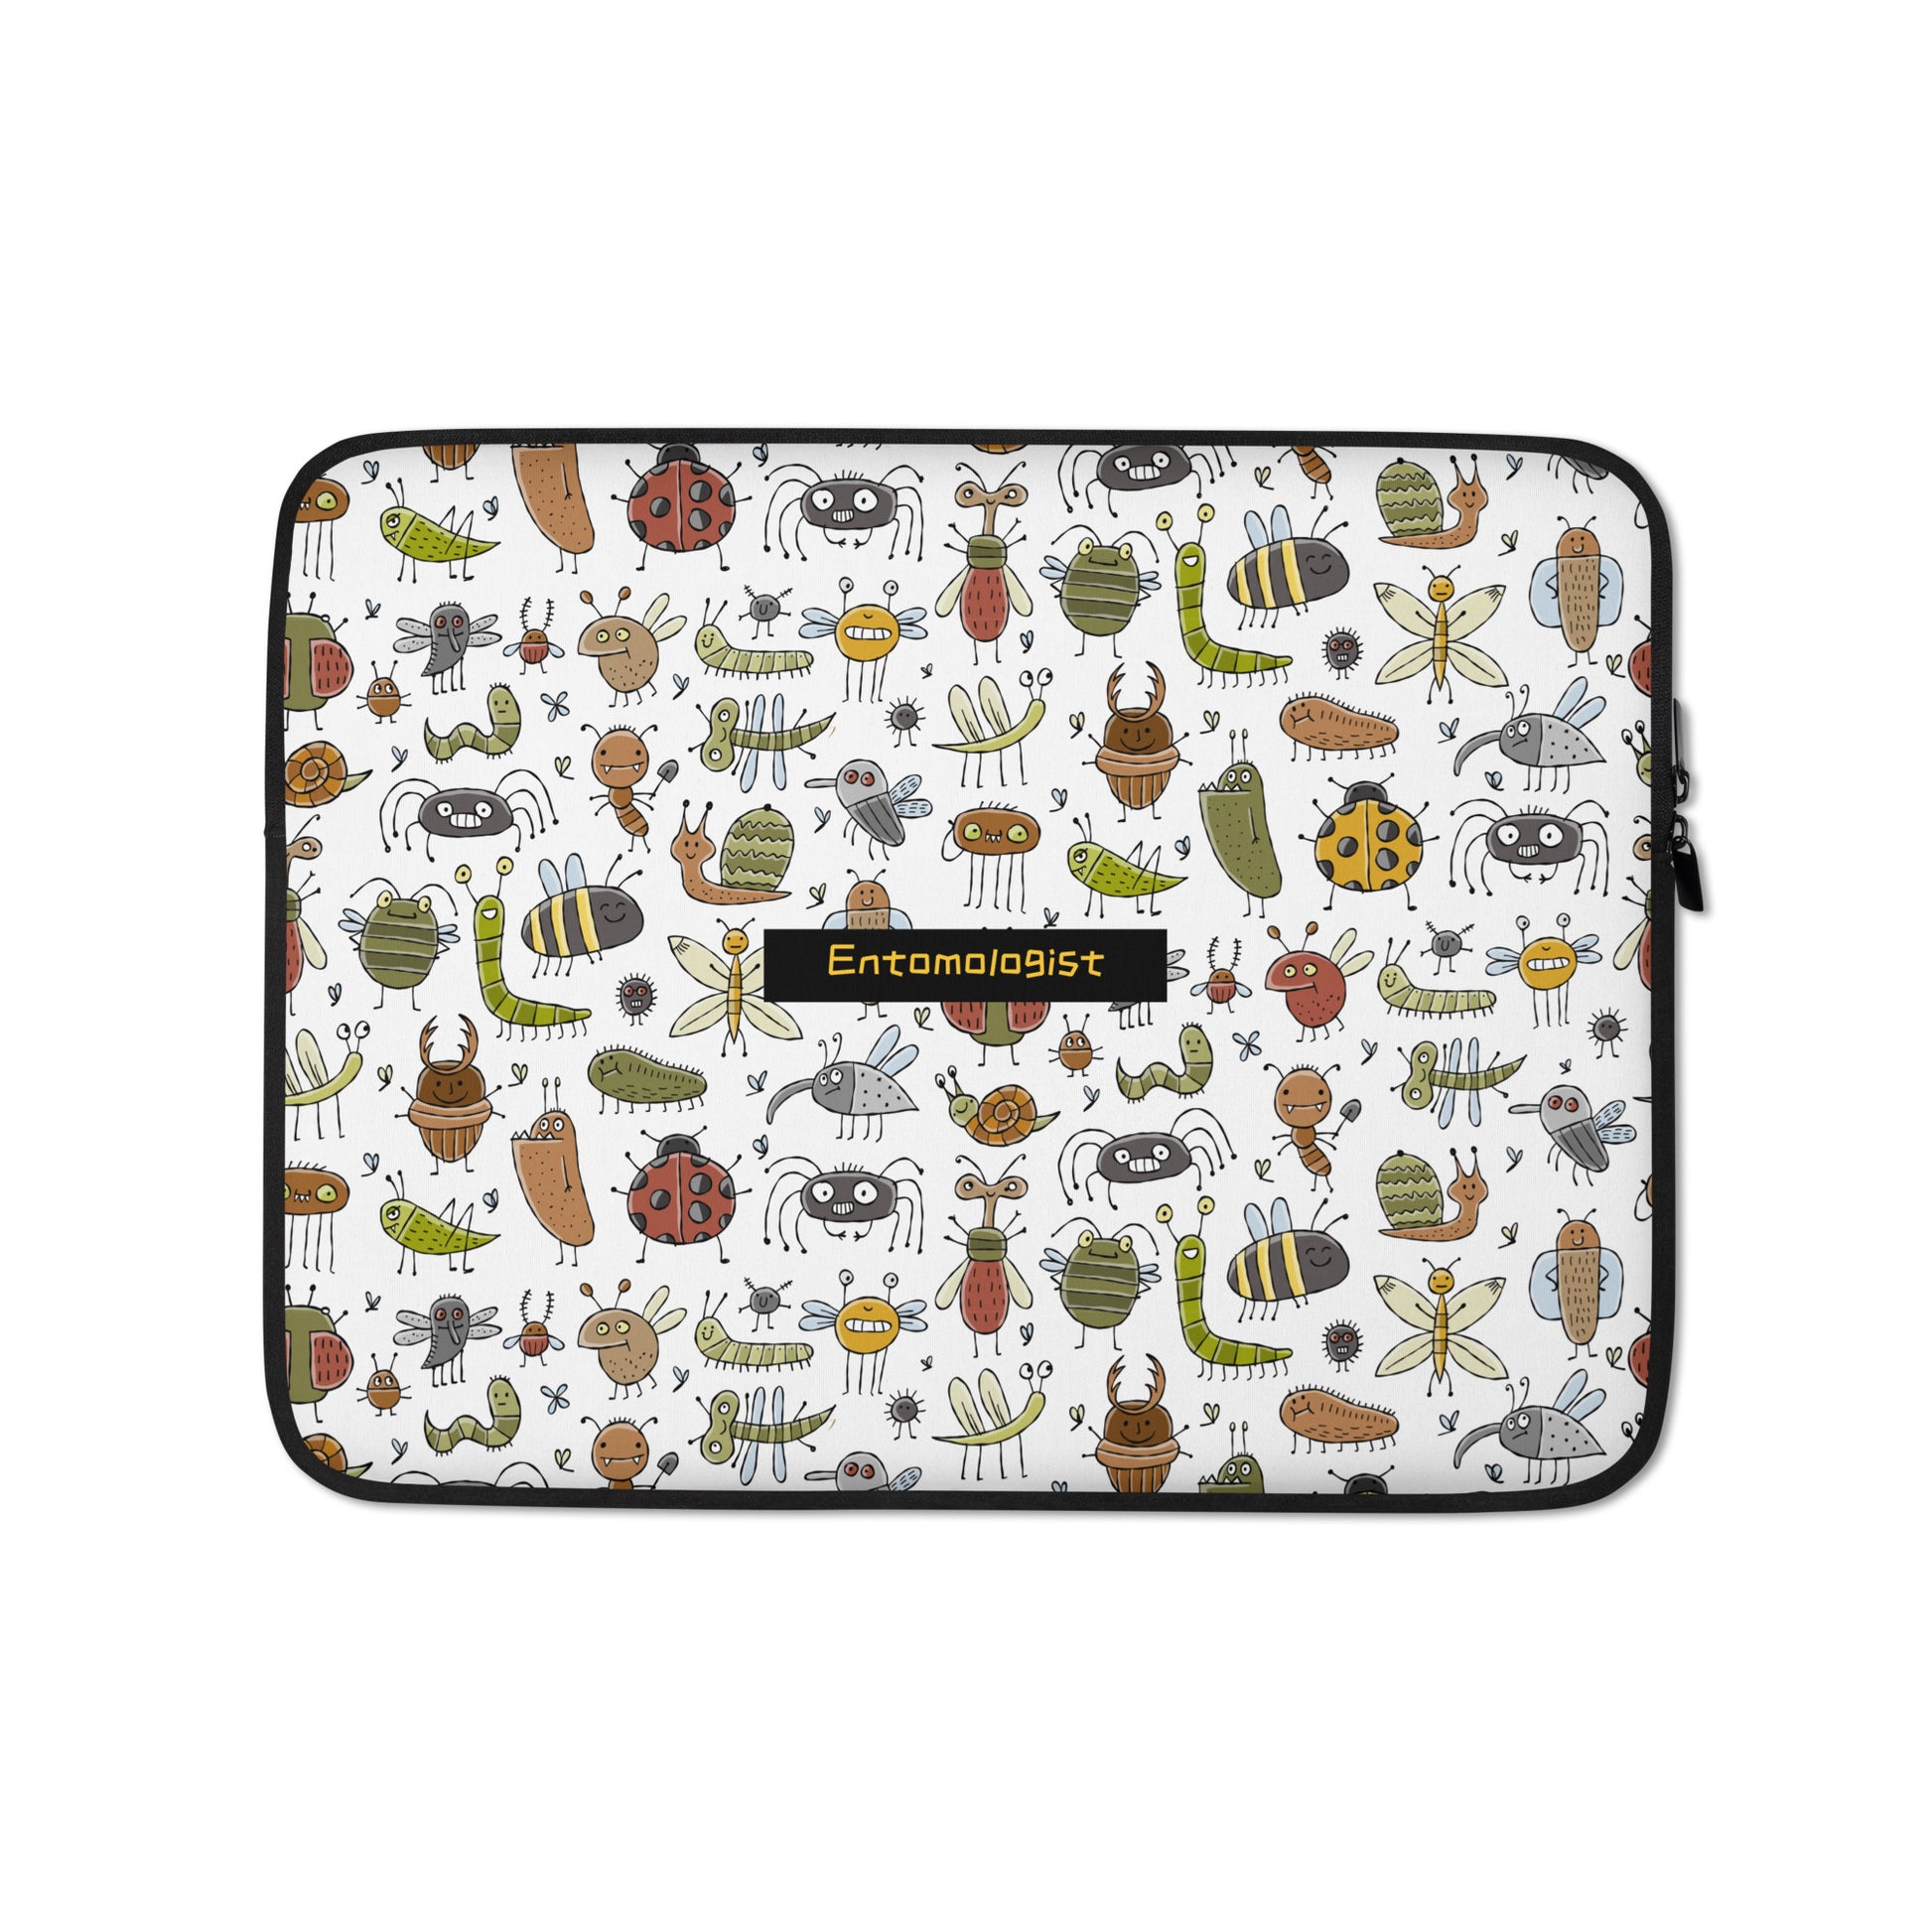 Entomologist Laptop Case 13 with funny insects collection